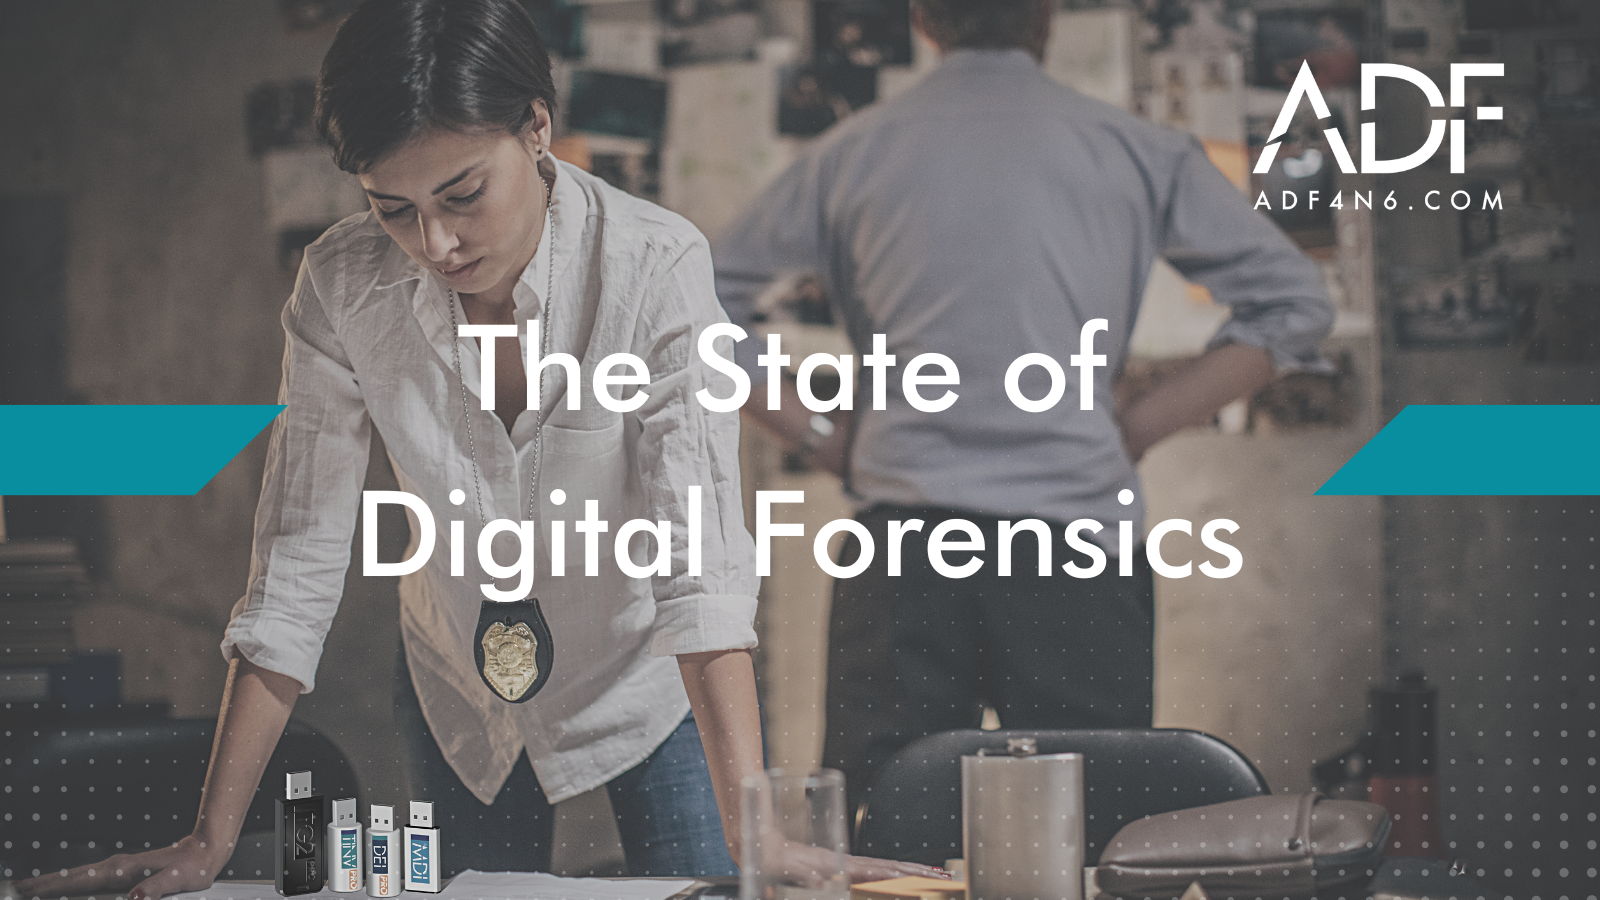 The State of Digital Forensics